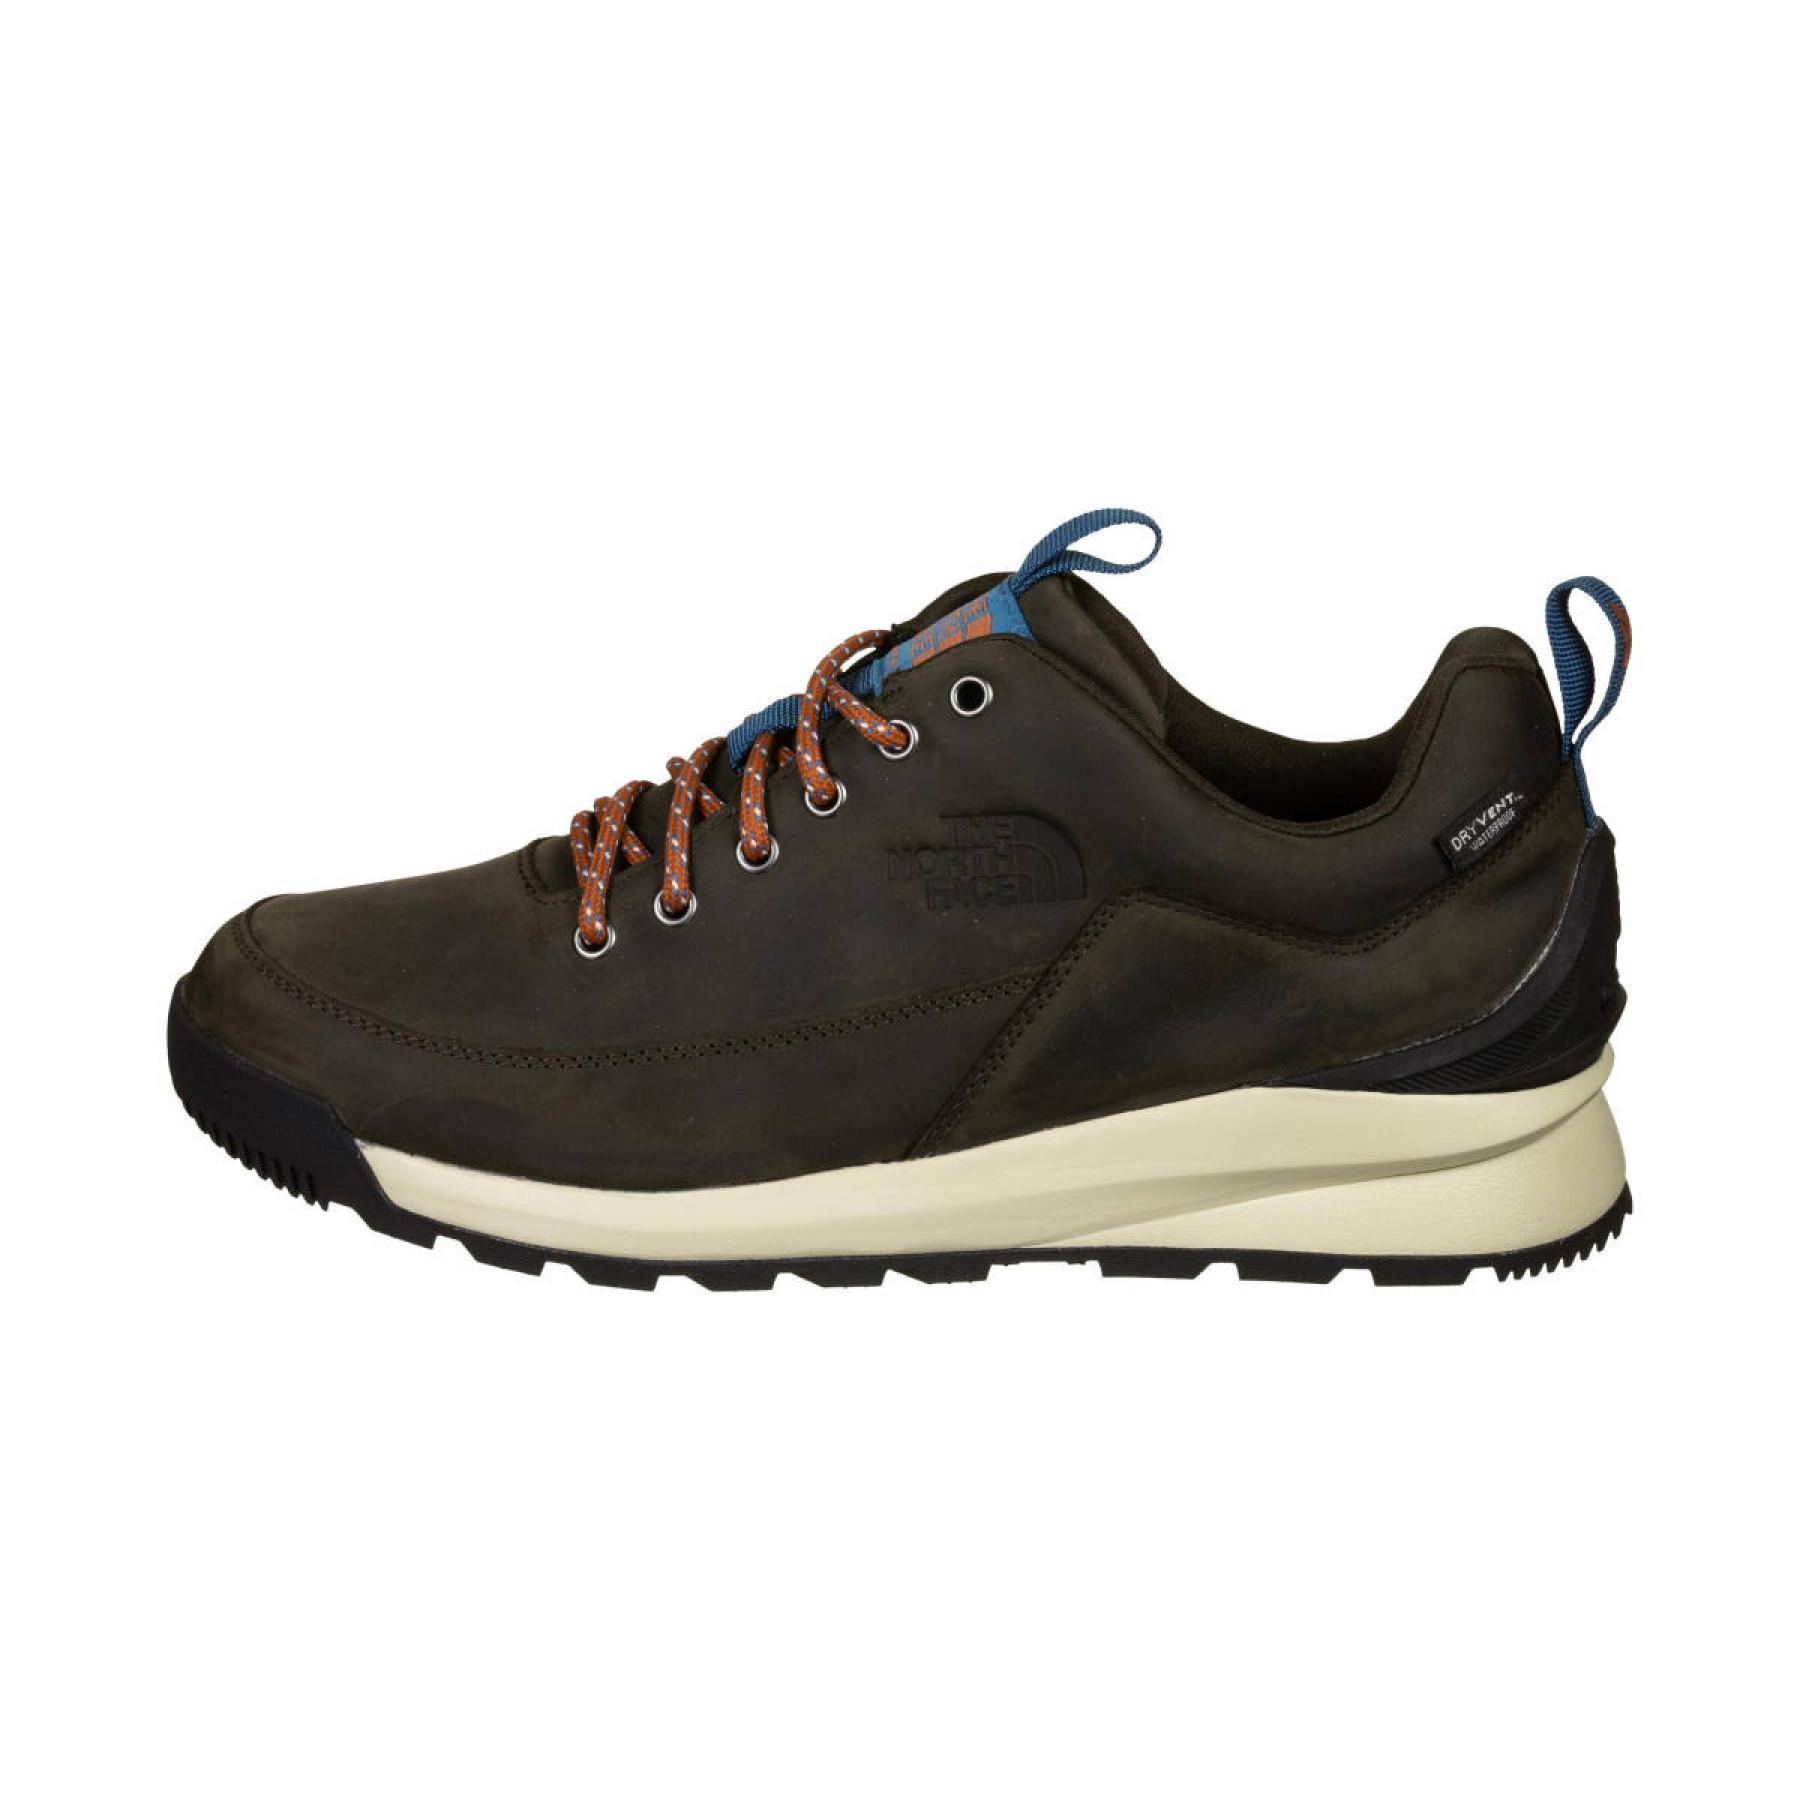 Baskets The North Face Premium waterproof-leather